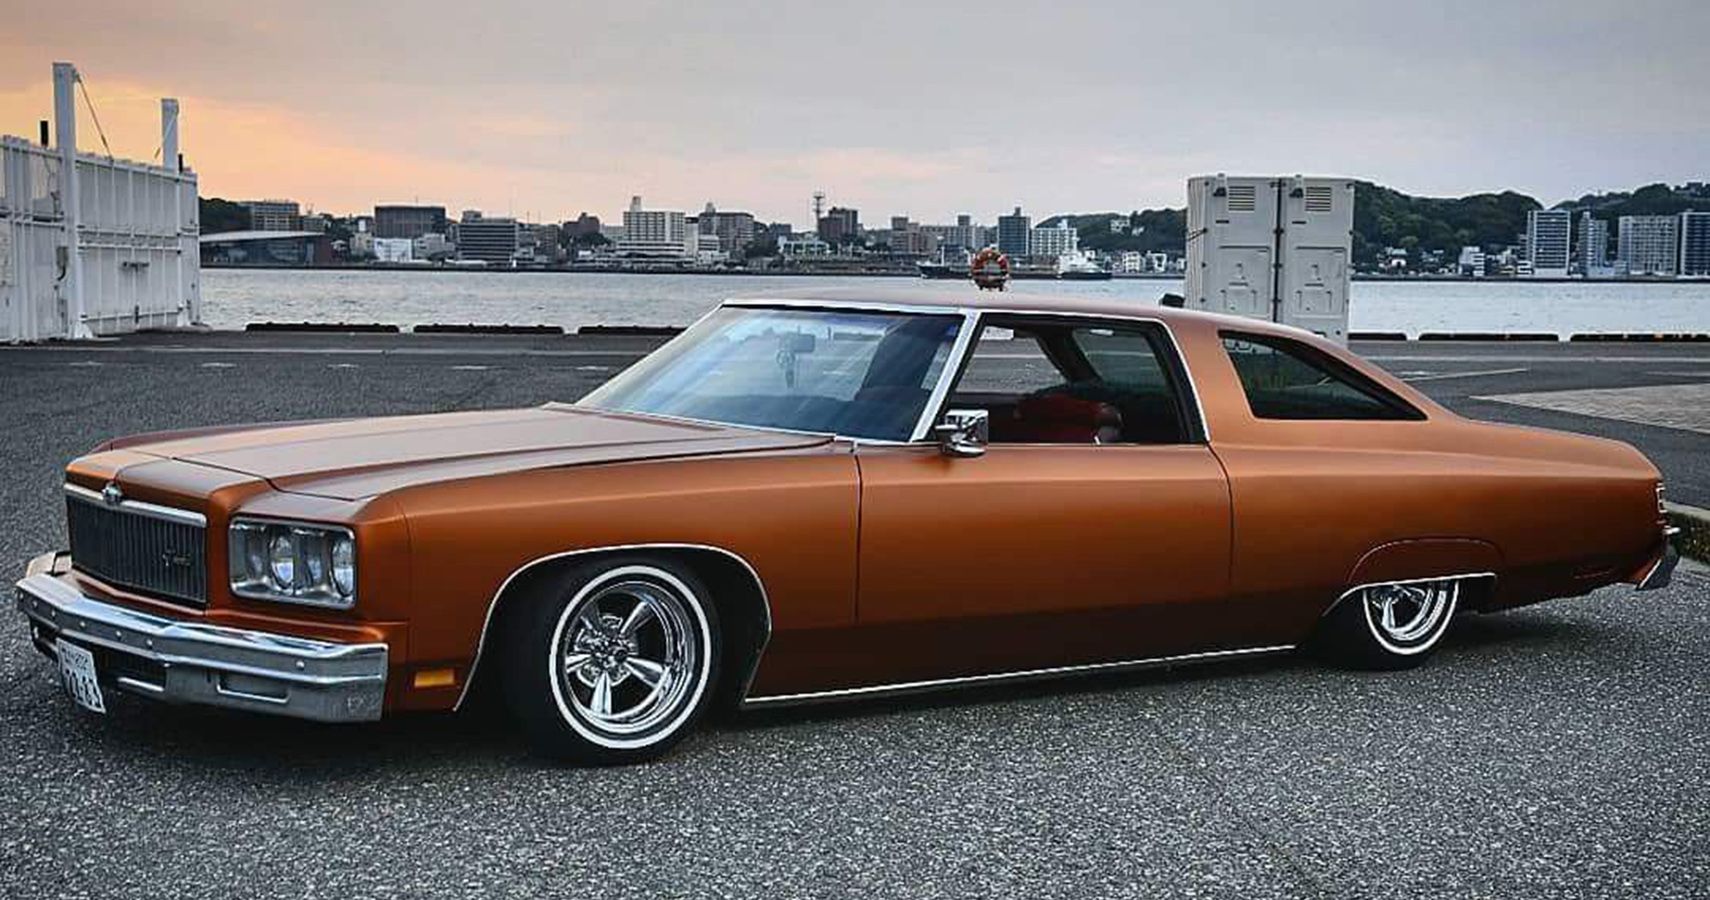 1975 Chevrolet Impala In Coffee Brown ‘Cuppa’